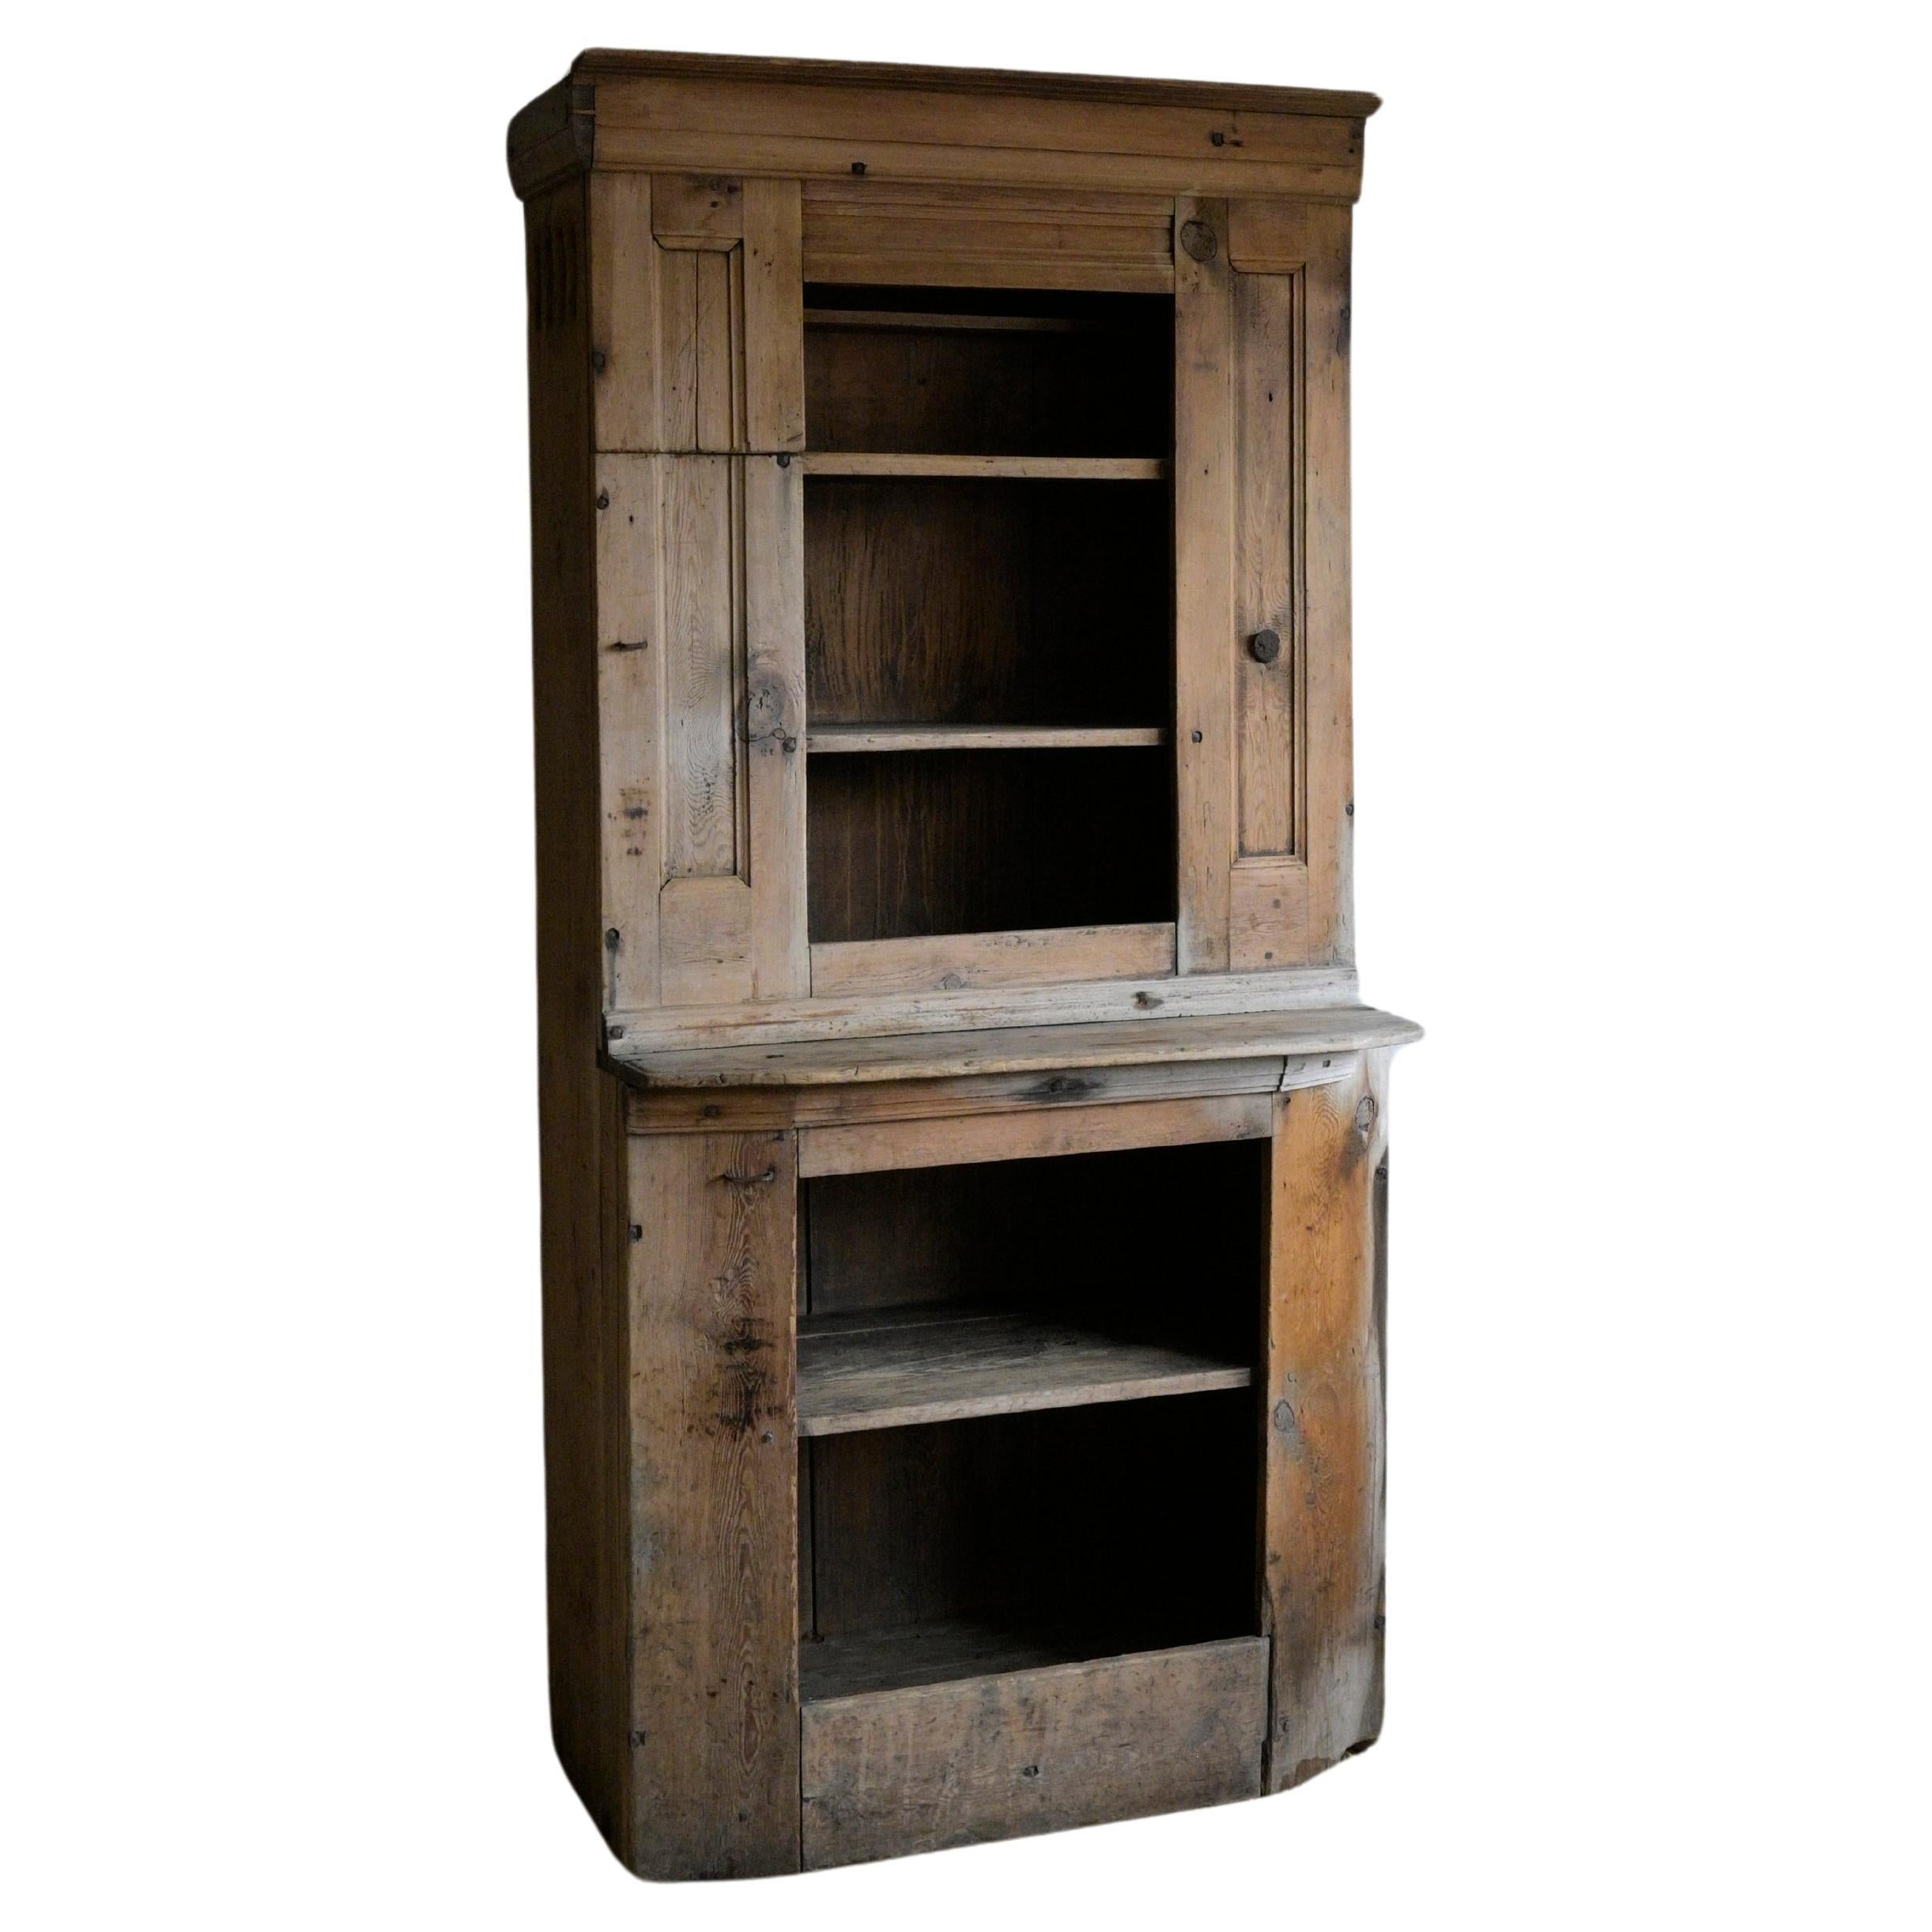 Swedish primitive Cabinet from the early 18th Century